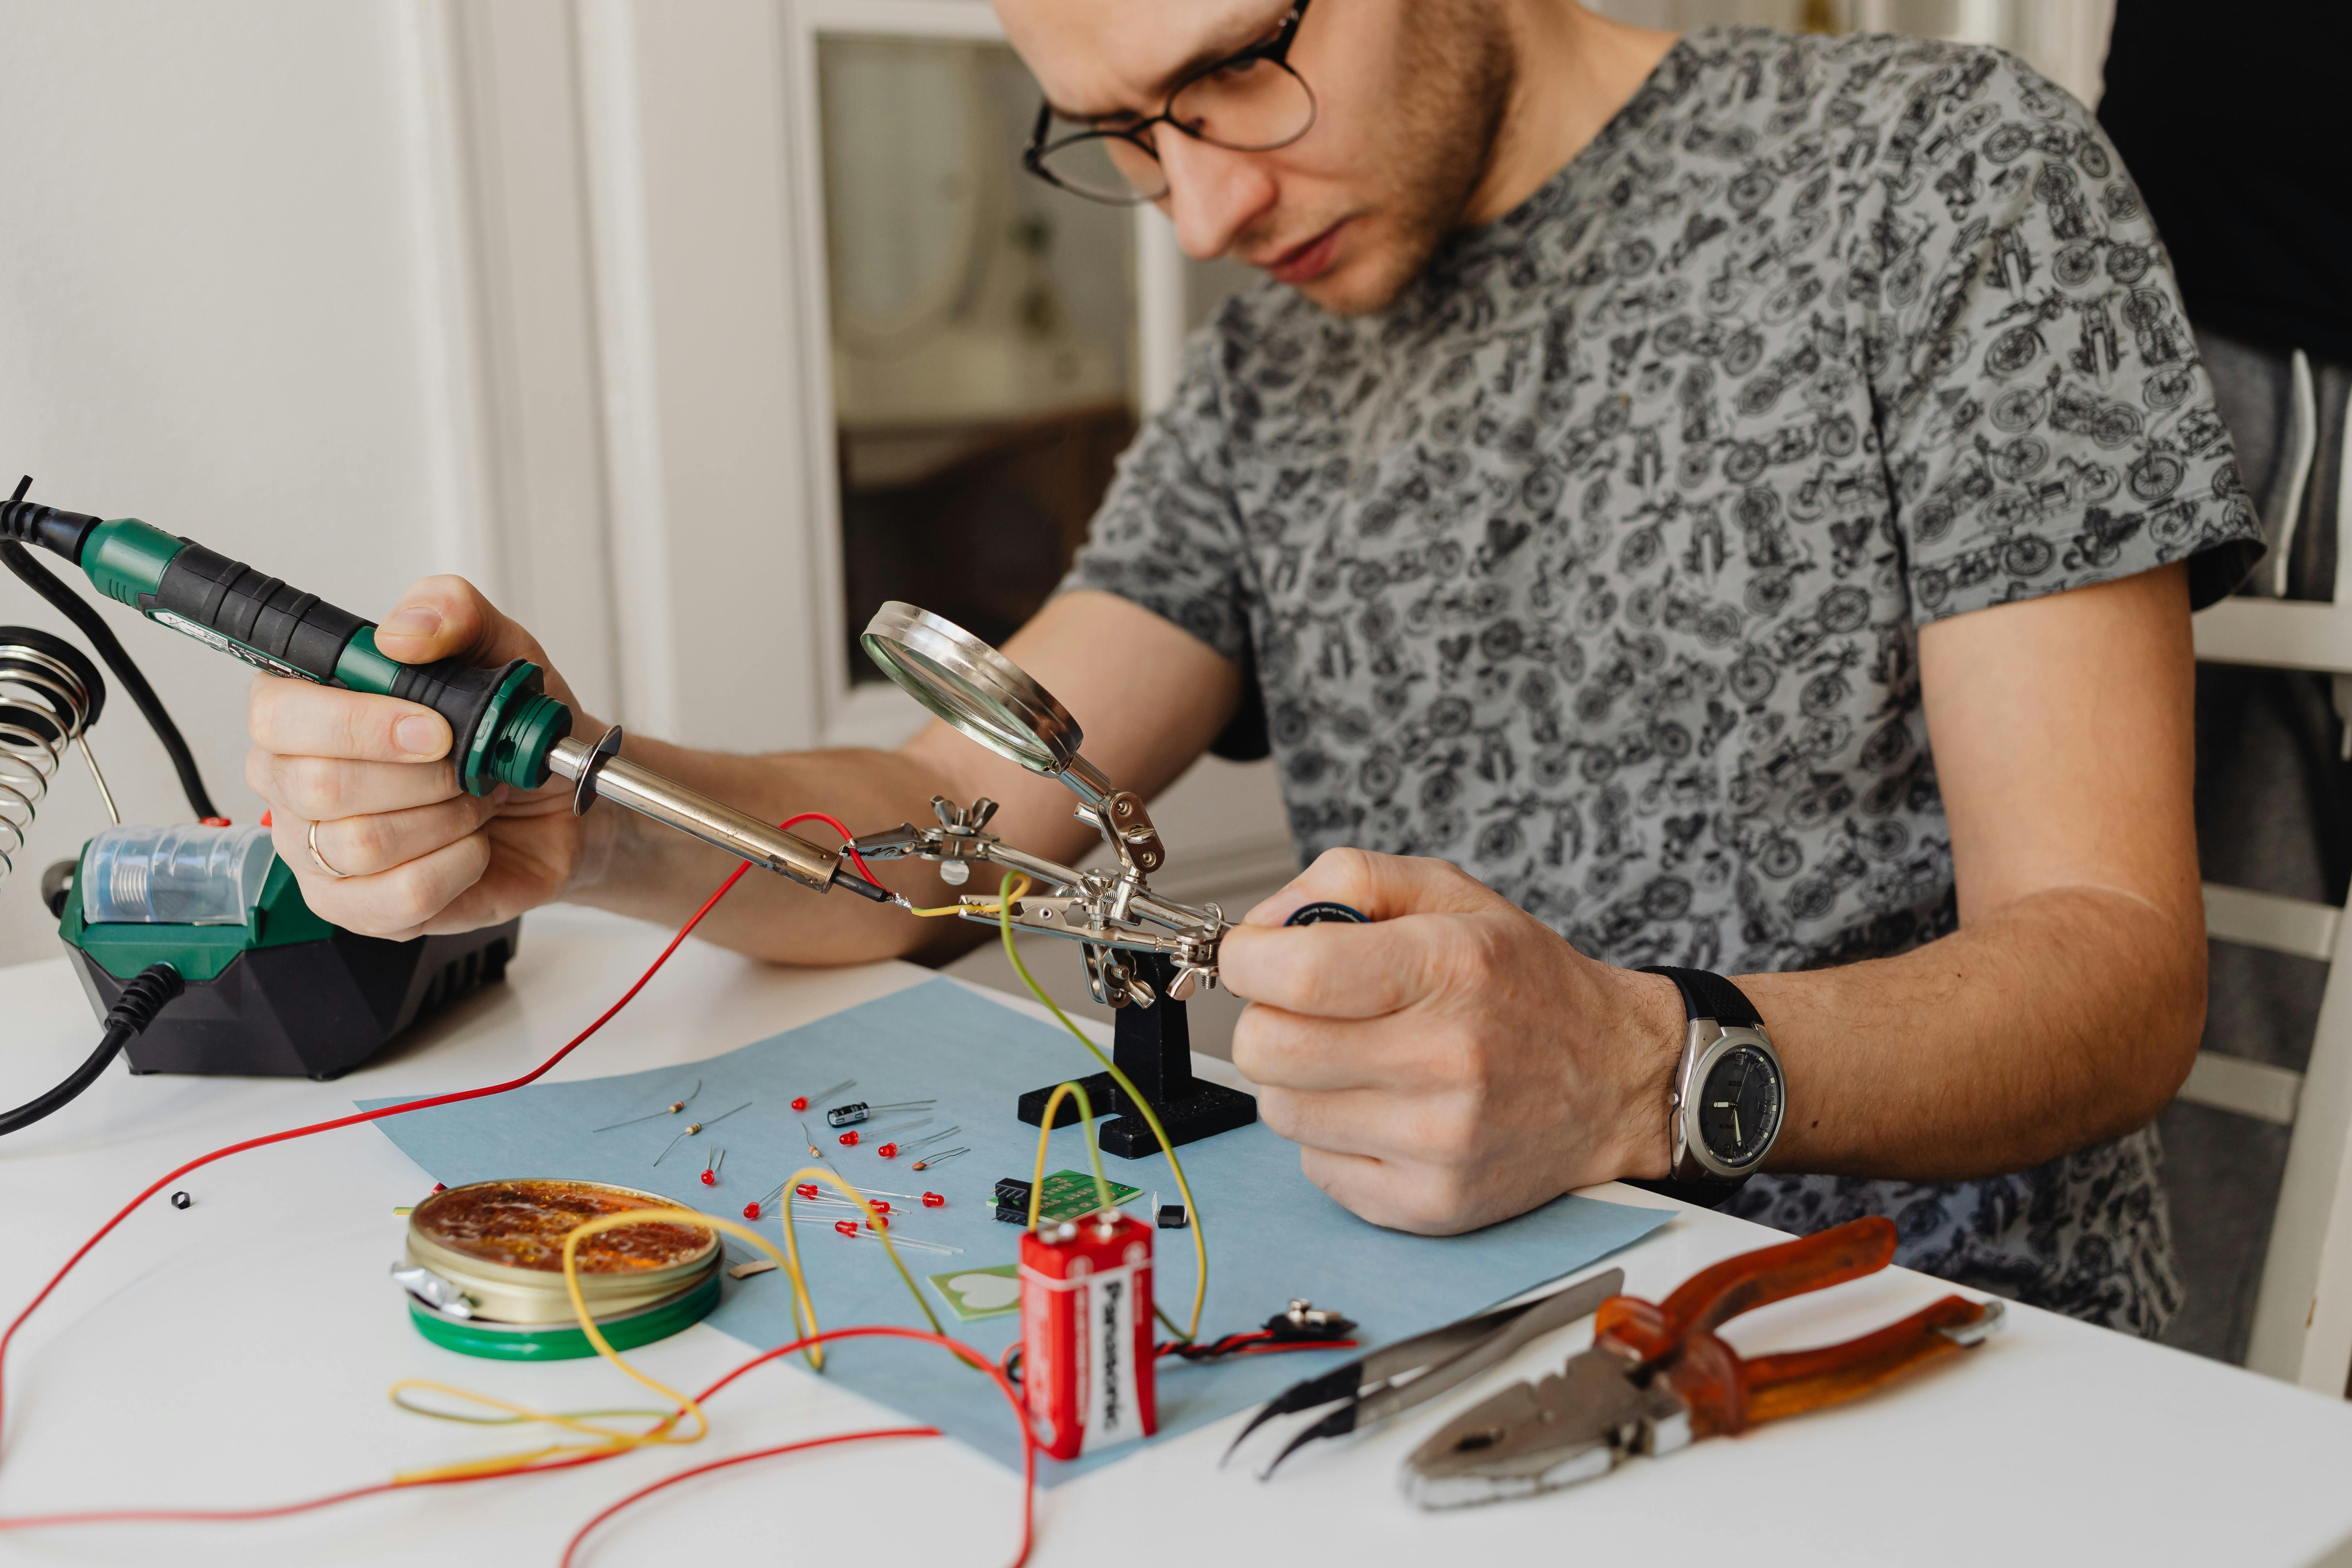 An electrician working at home | Source: Pexels